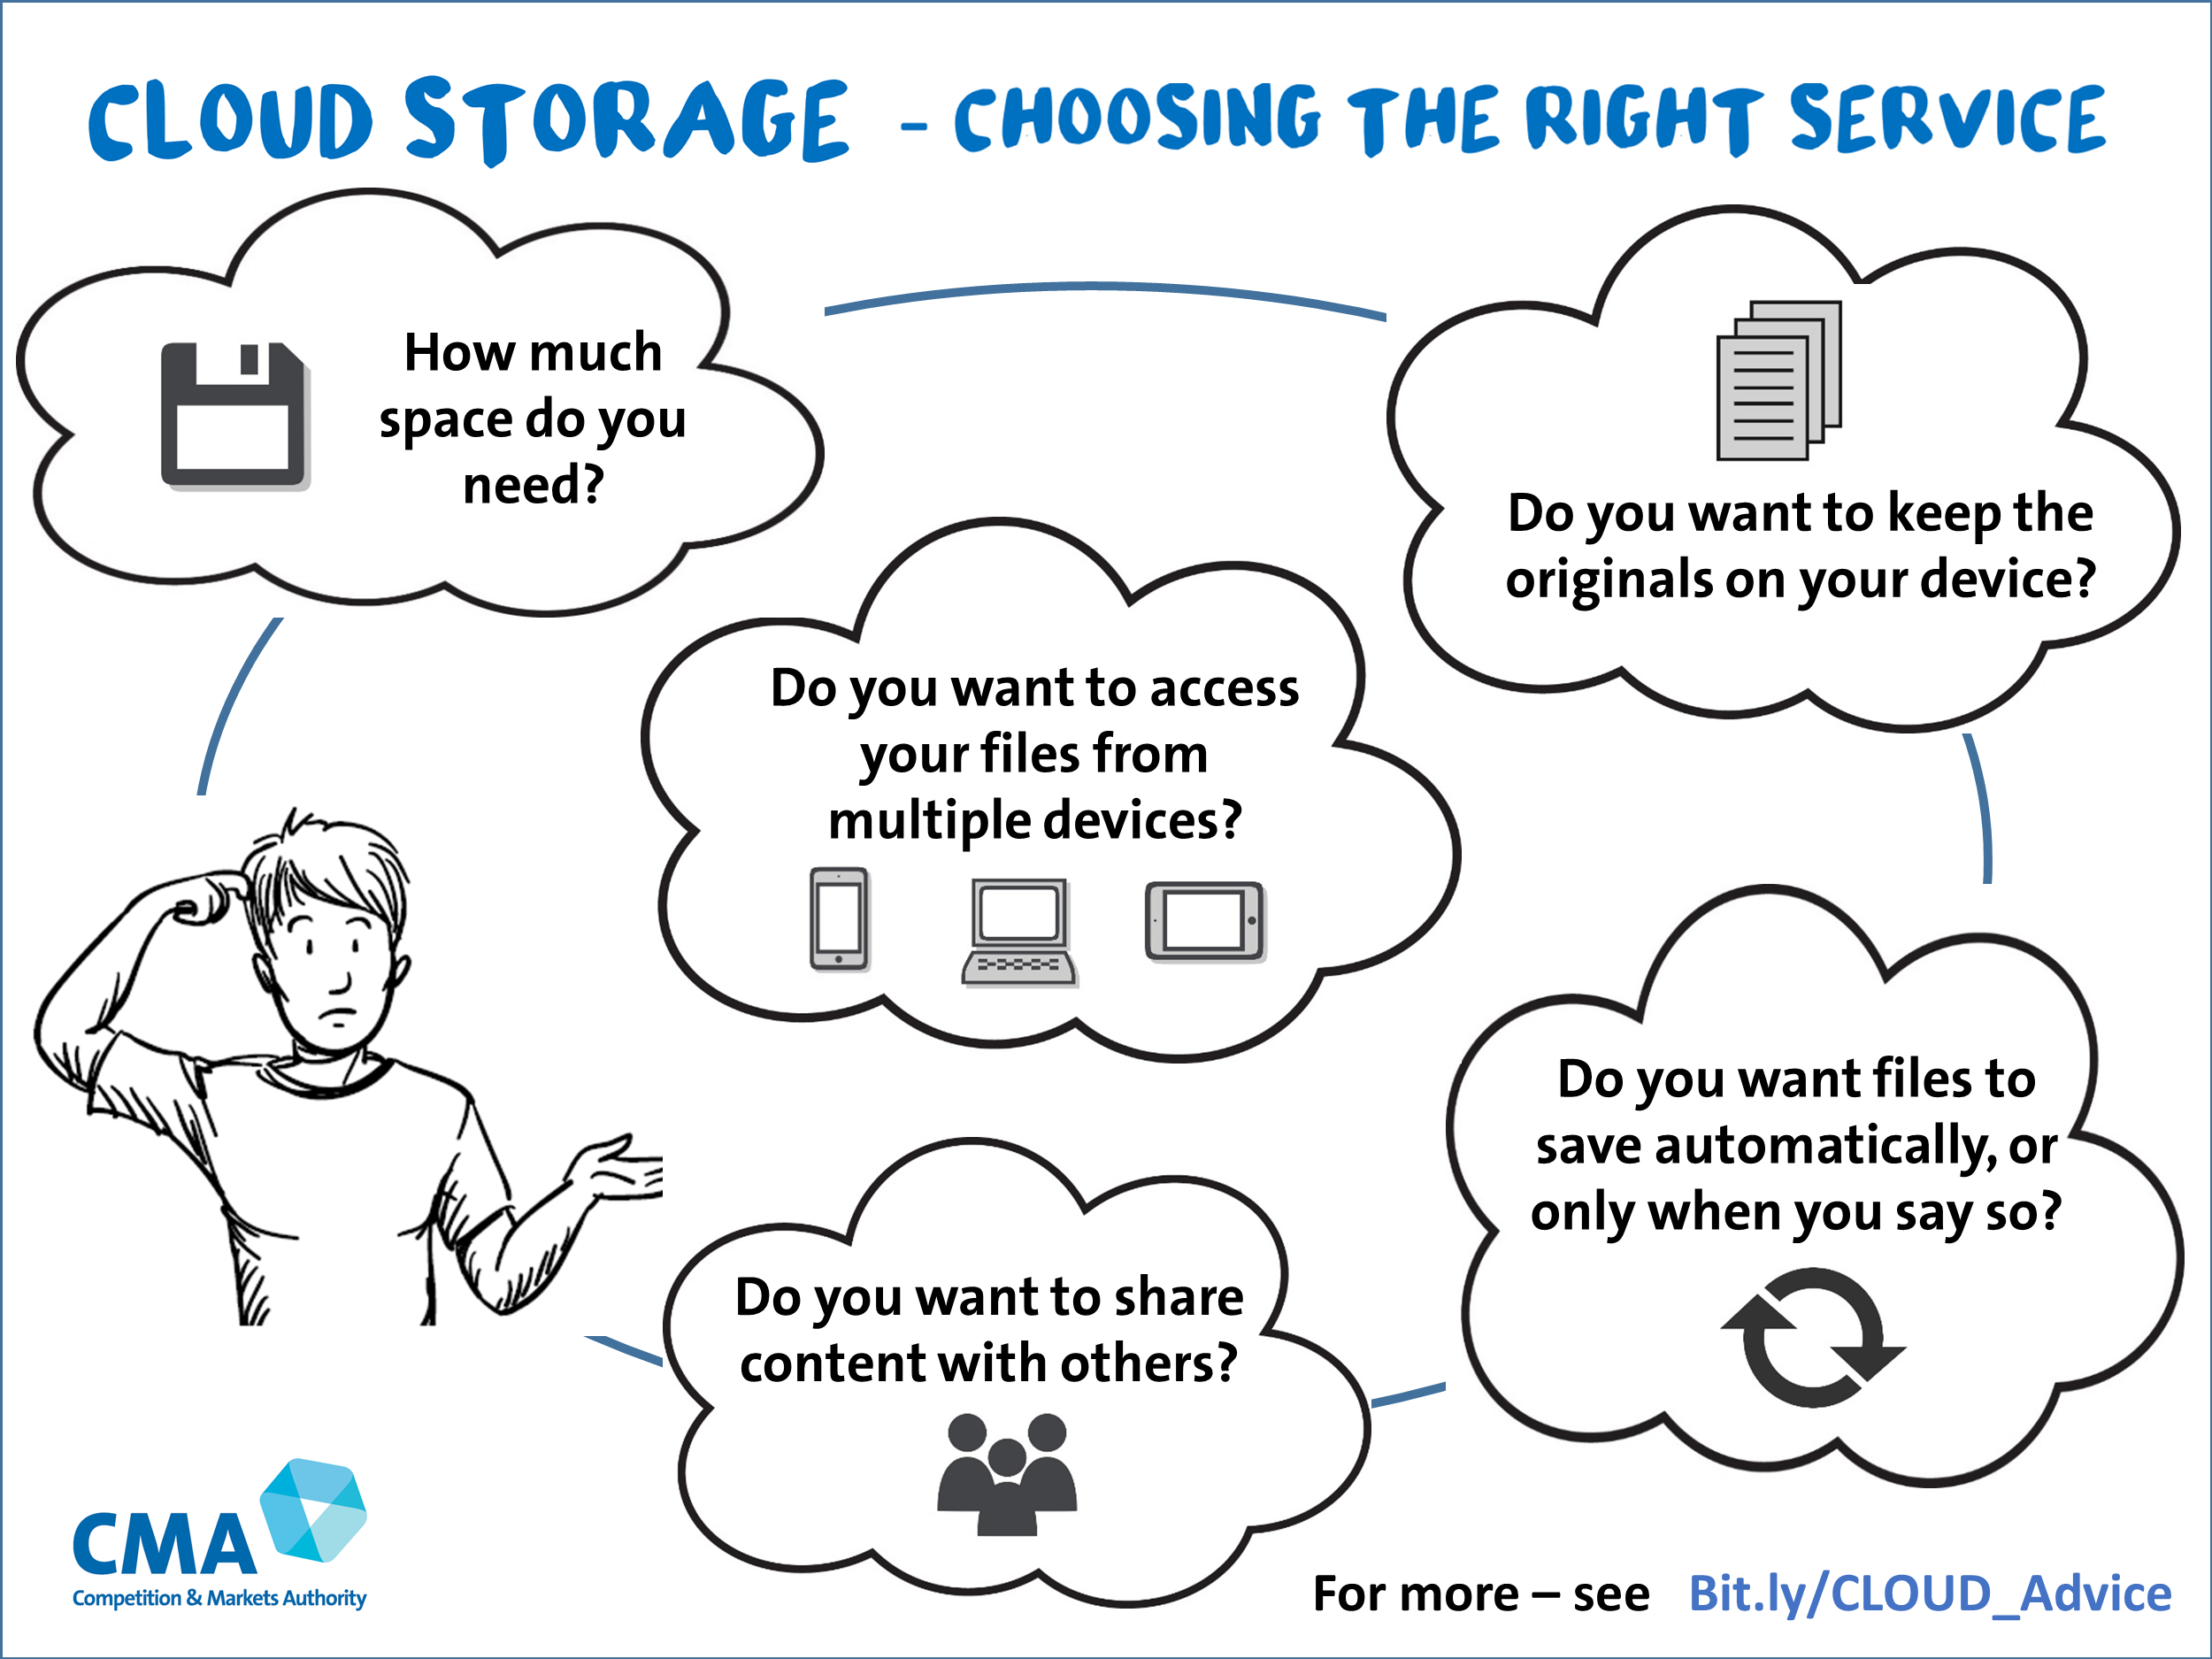 Cloud storage - the right service